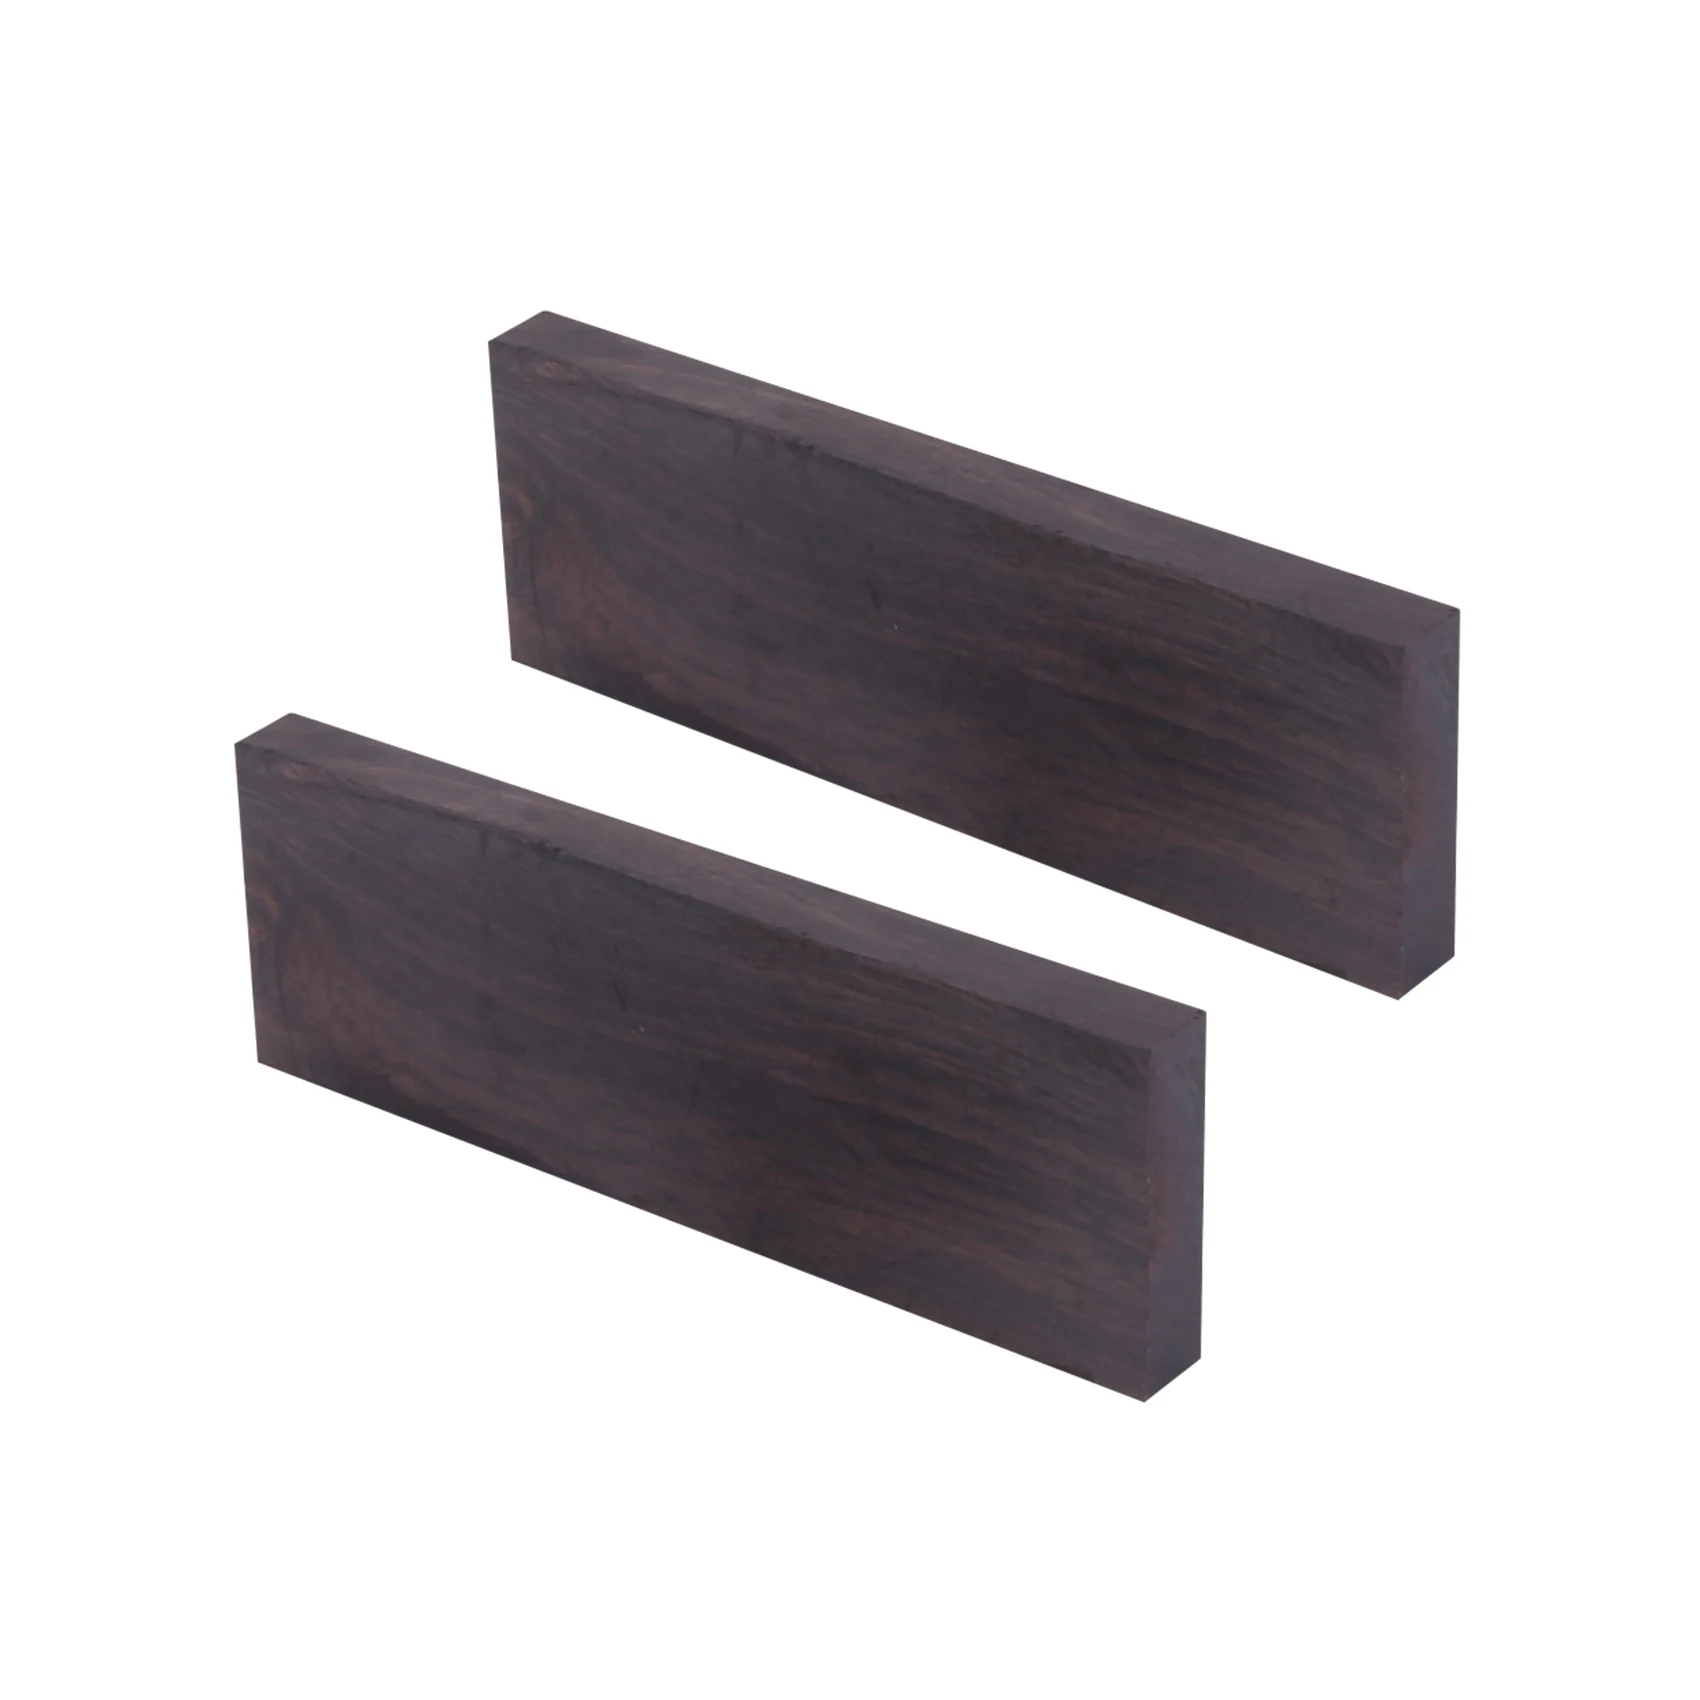 

2 Pcs Black Ebony Lumber Wood Timber Handle Plate for Music Instruments DIY Tools 3/8 Inch X 1.5 Inch X 5 Inch